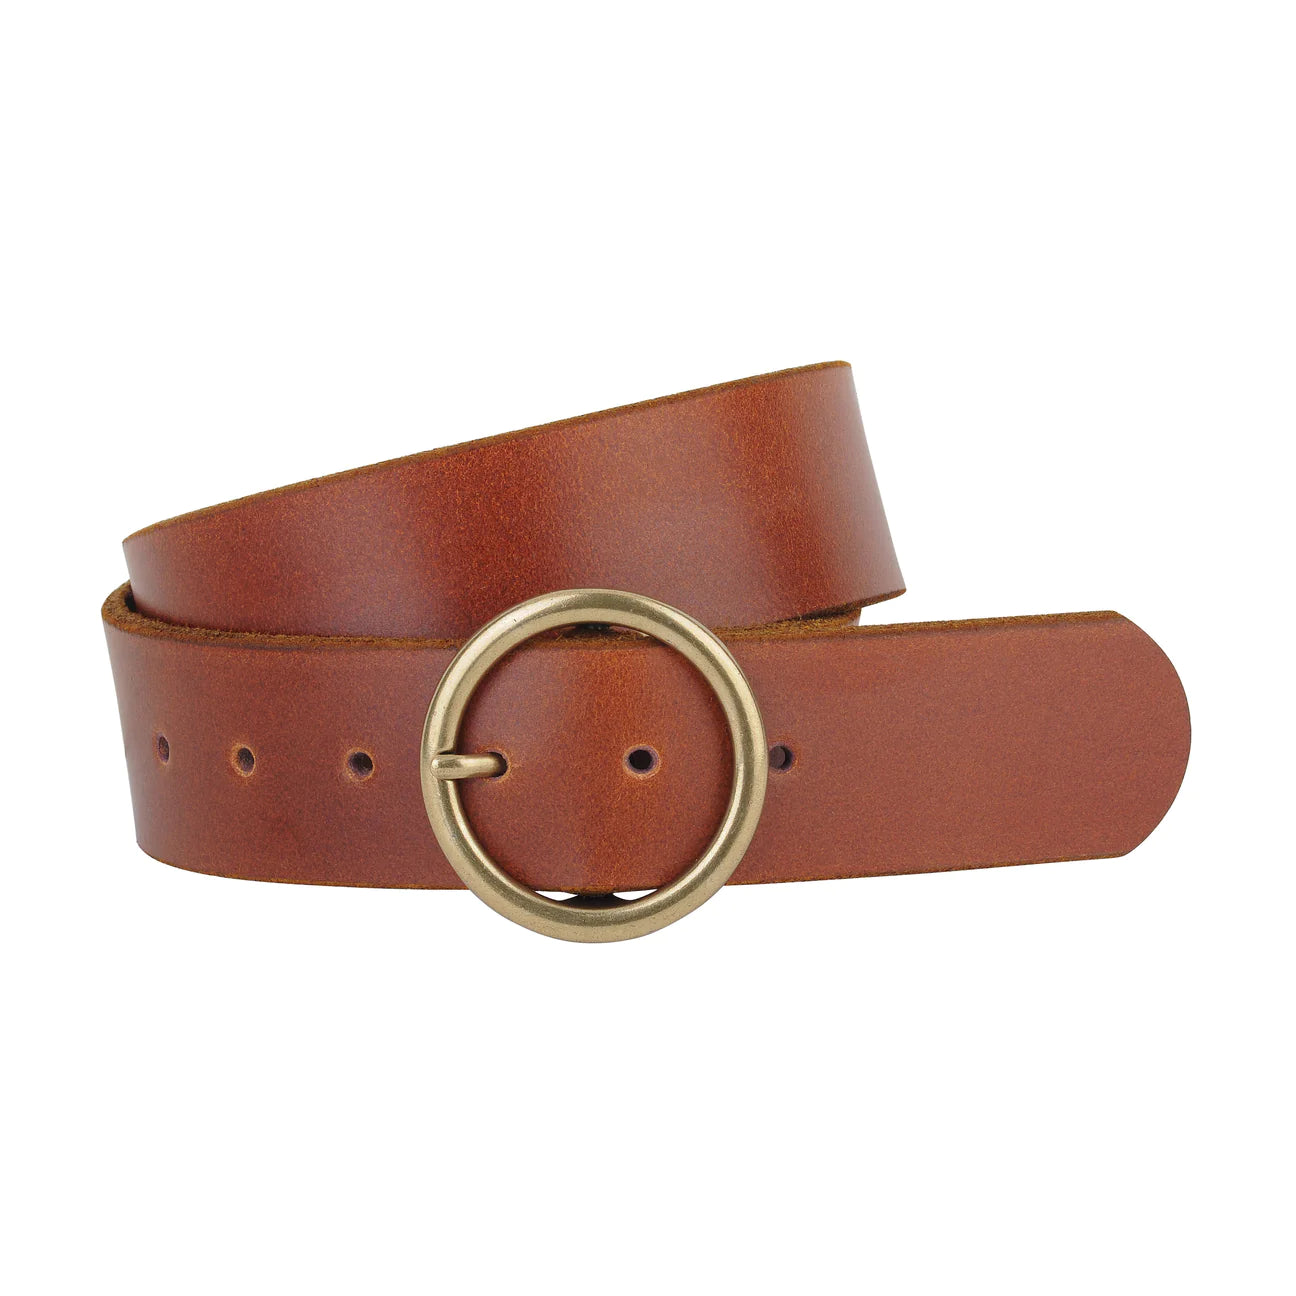 Load image into Gallery viewer, Wide Belt with Copper Tone Buckle - Tan
